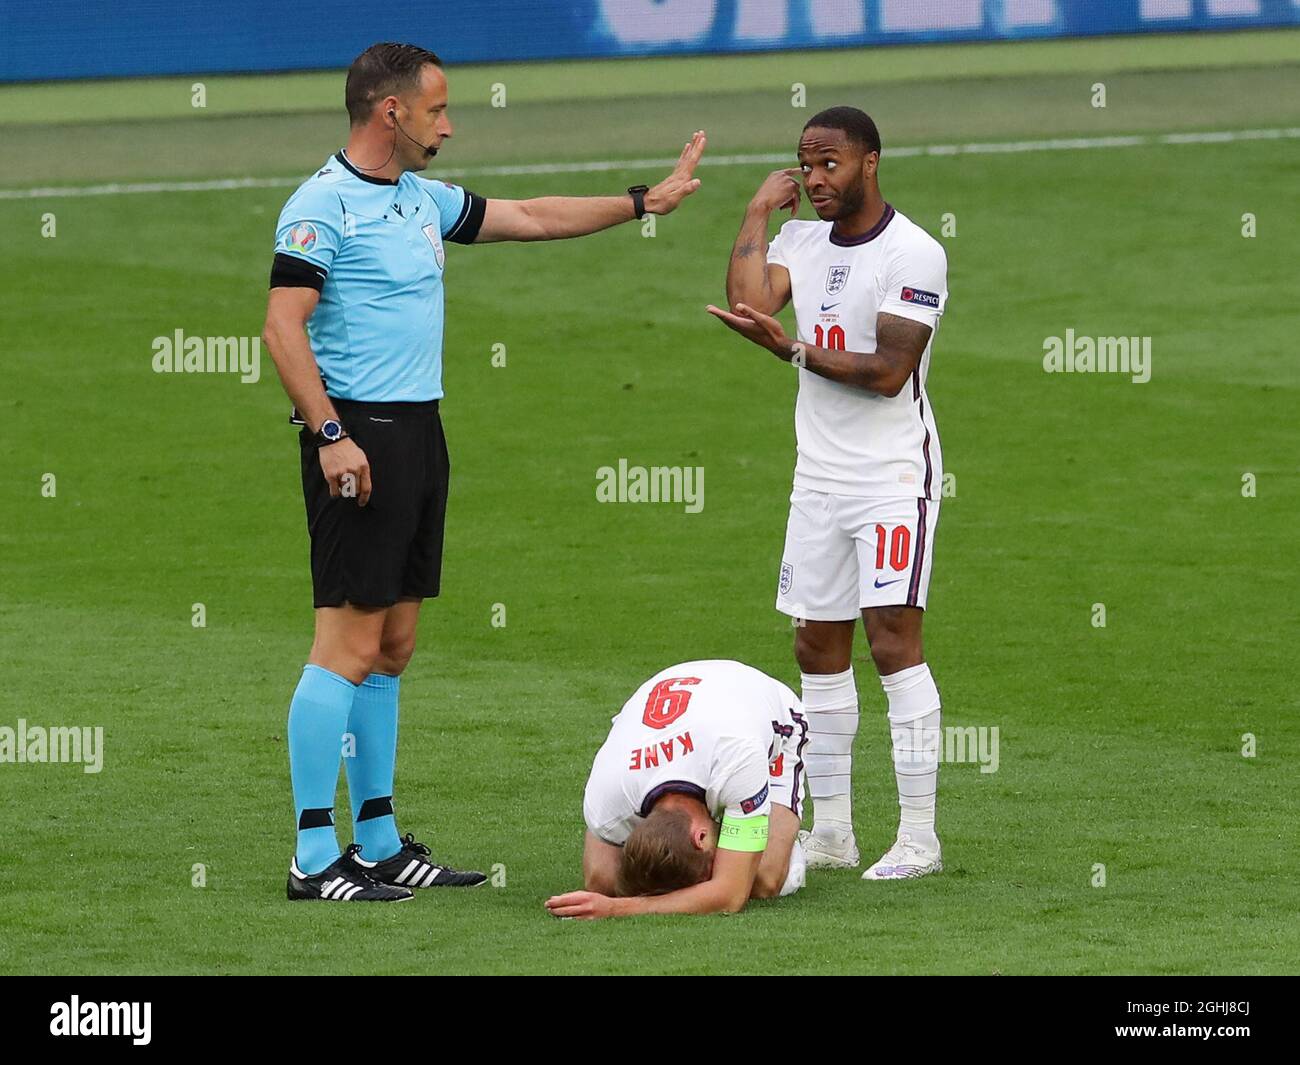 London, England, 22nd June 2021. Harry Kane of England goes down injured while Raheem Sterling of England tells the referral Artur Dias to keep an eye out during the UEFA European Championships match at Wembley Stadium, London. Picture credit should read: David Klein / Sportimage via PA Images Stock Photo